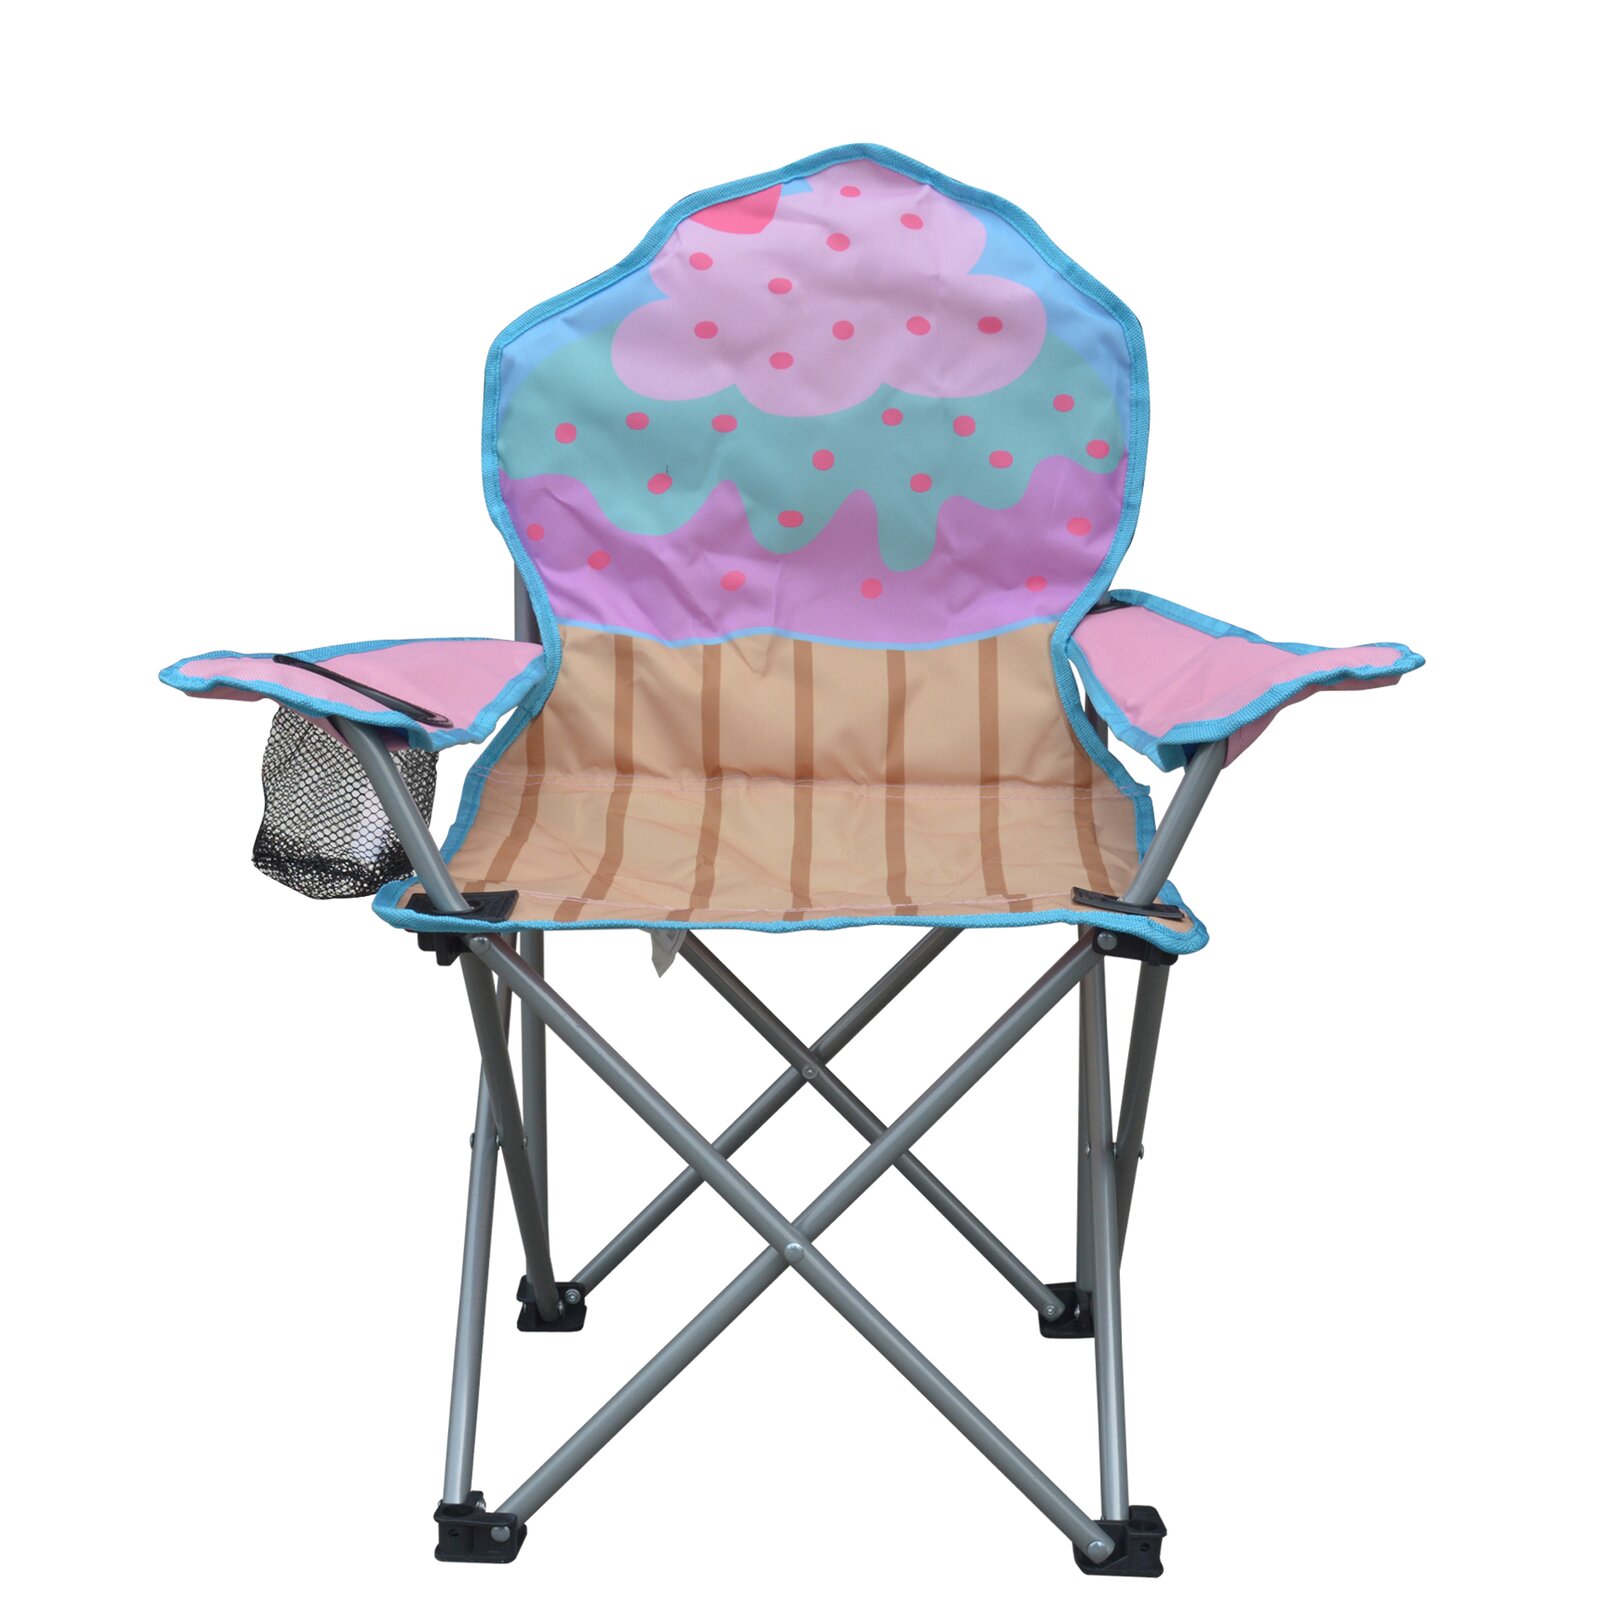 Trinx Jeco Kids Outdoor Folding Lawn And Camping Chair With Cup Holder, Cupcake Camp Chair